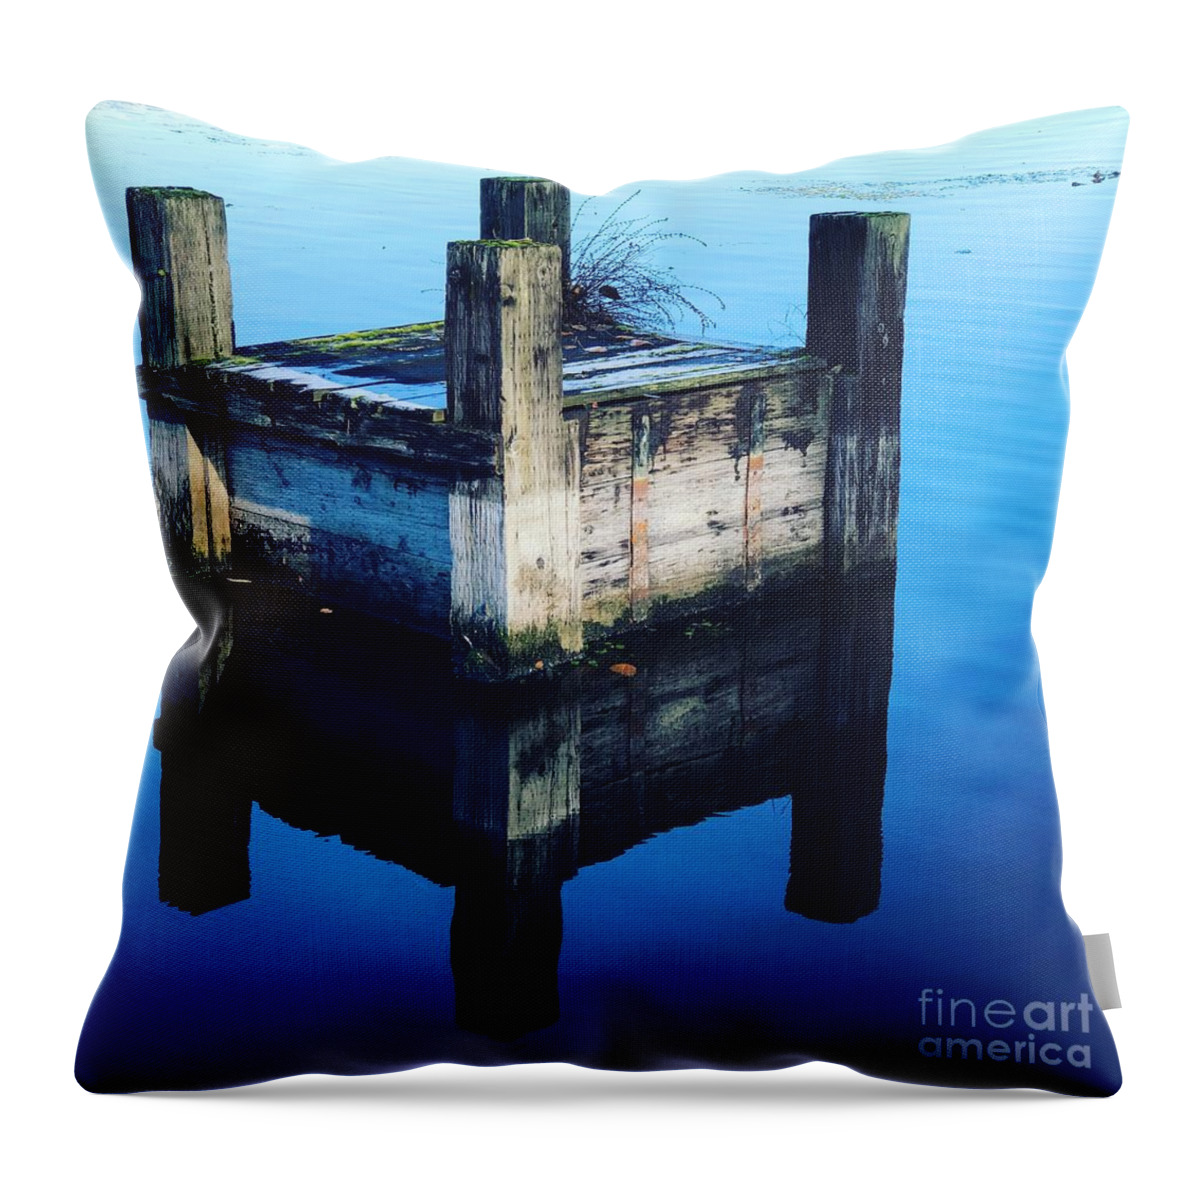 Blue Throw Pillow featuring the photograph Blue Dock by Suzanne Lorenz